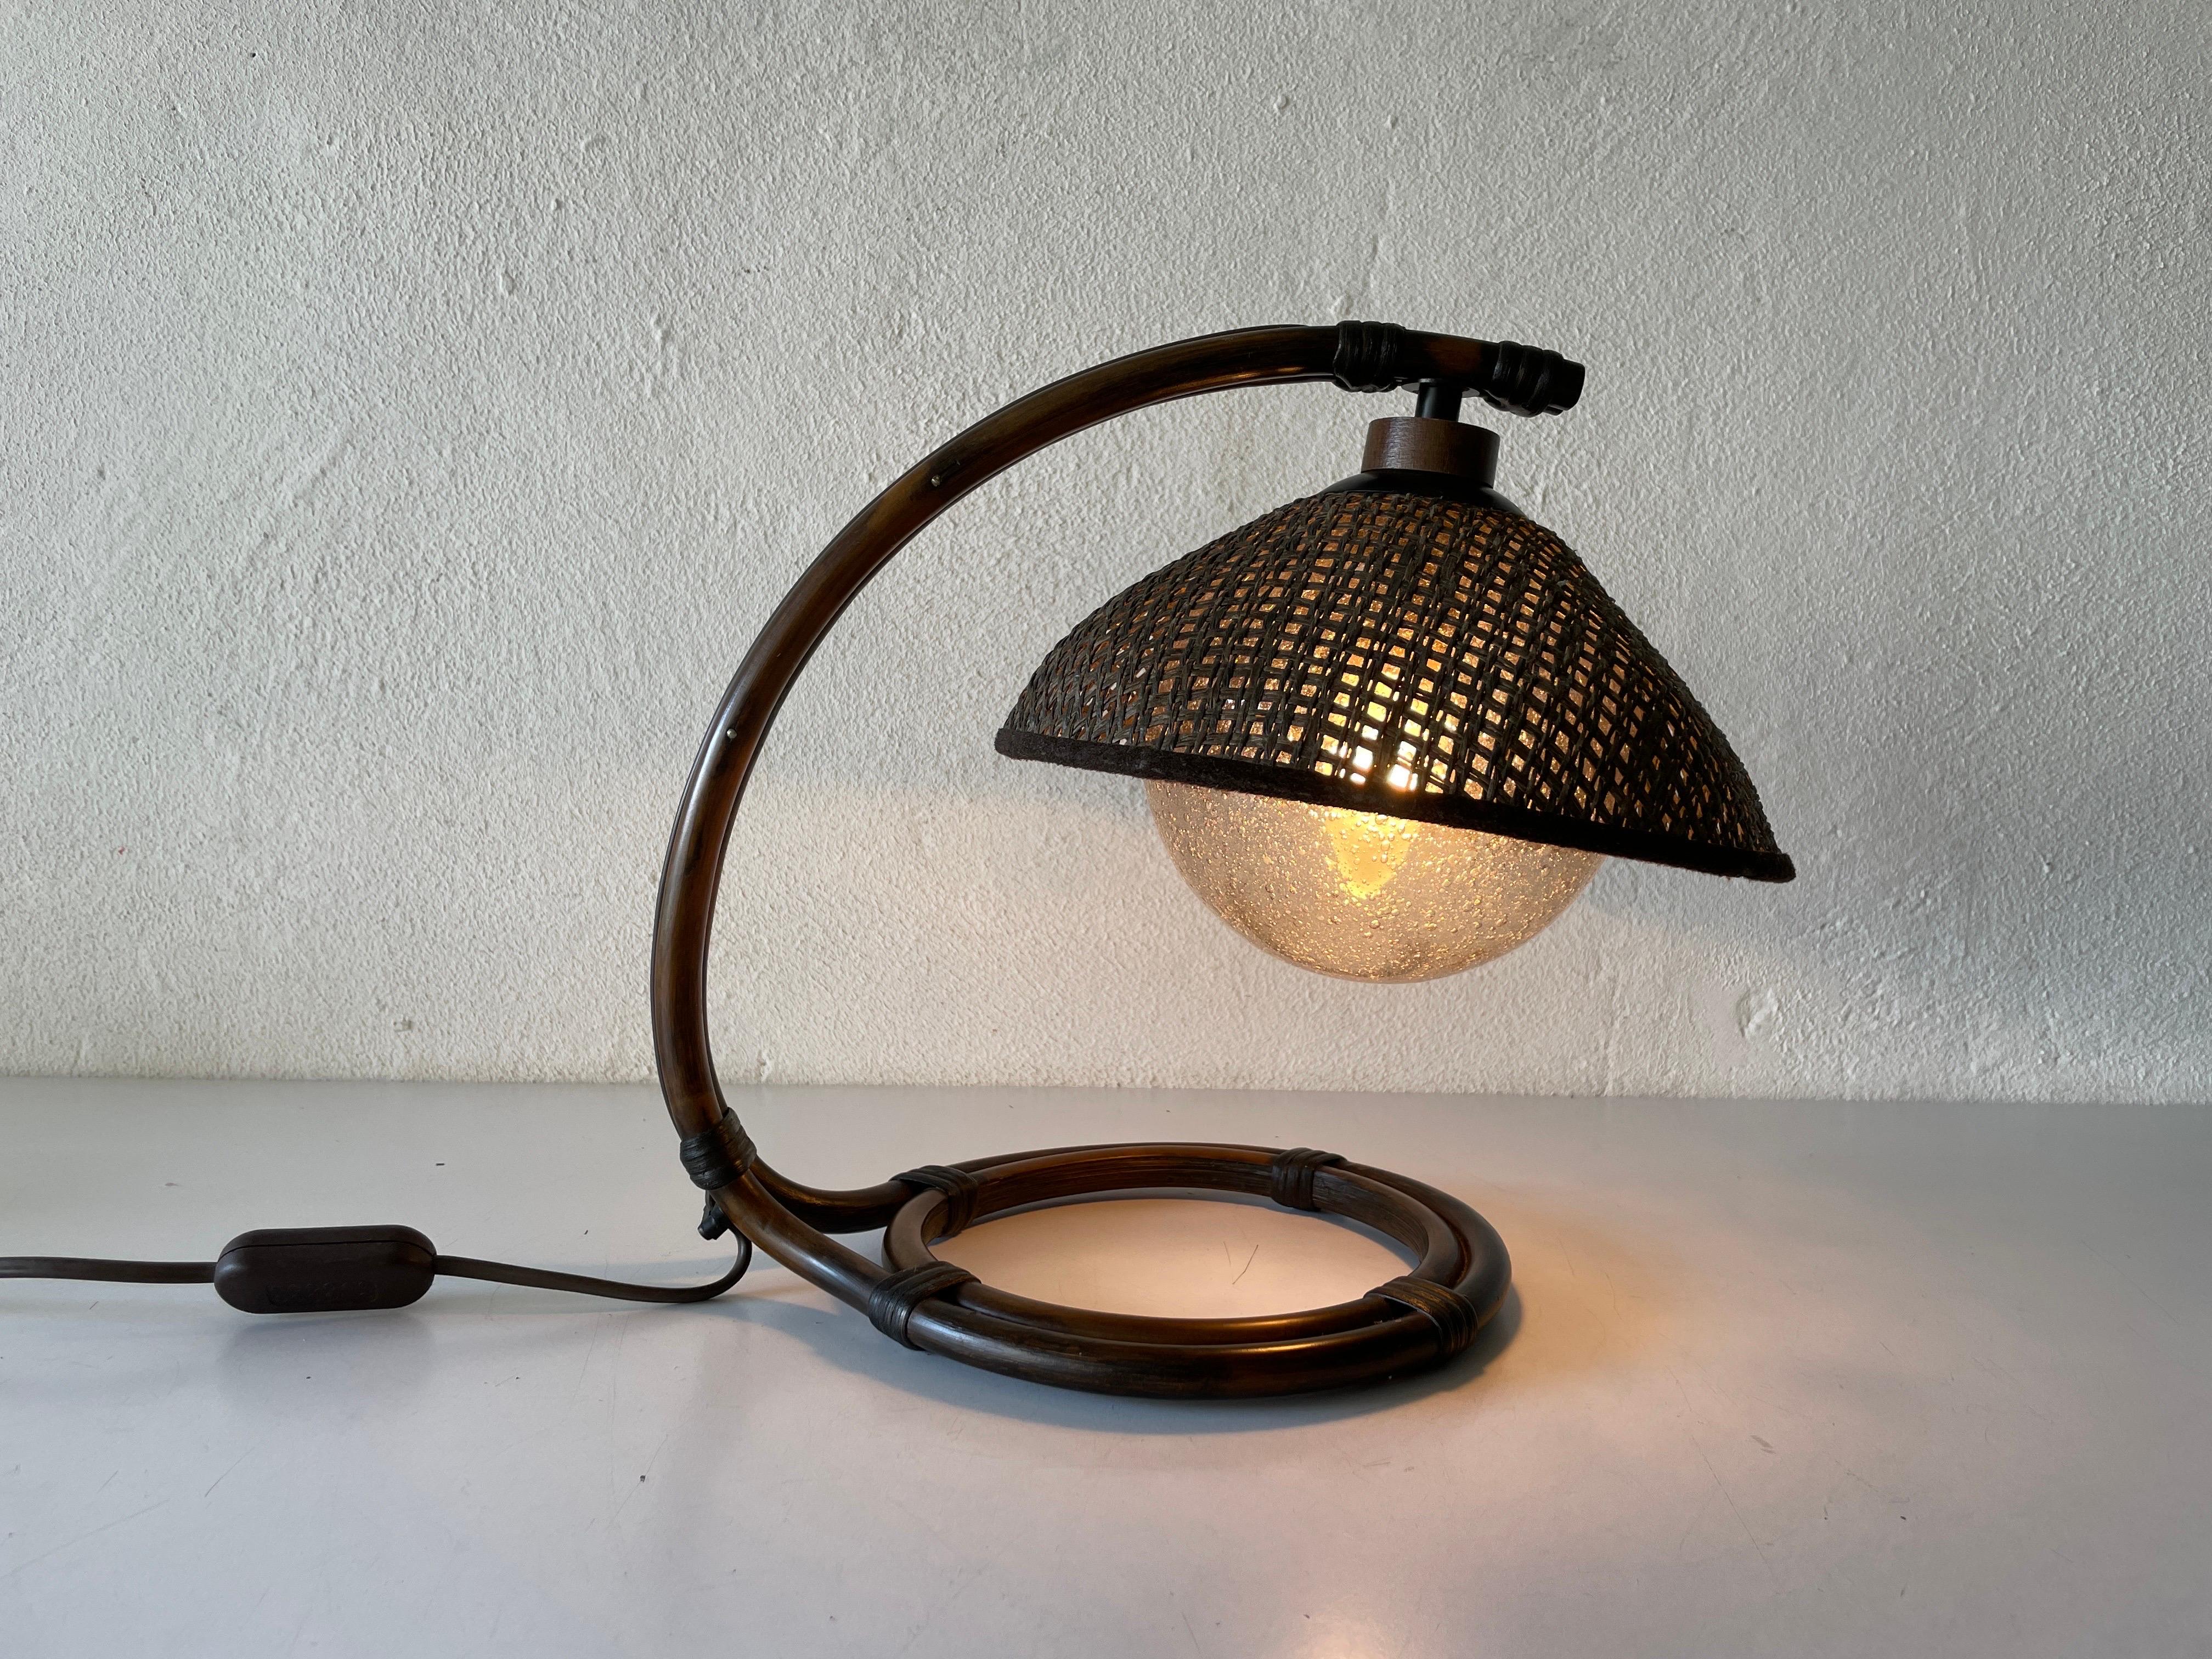 Rare Bamboo & Wicker Bedside Lamp Air Bubble Glass by Temde, 1960s, Switzerland For Sale 2